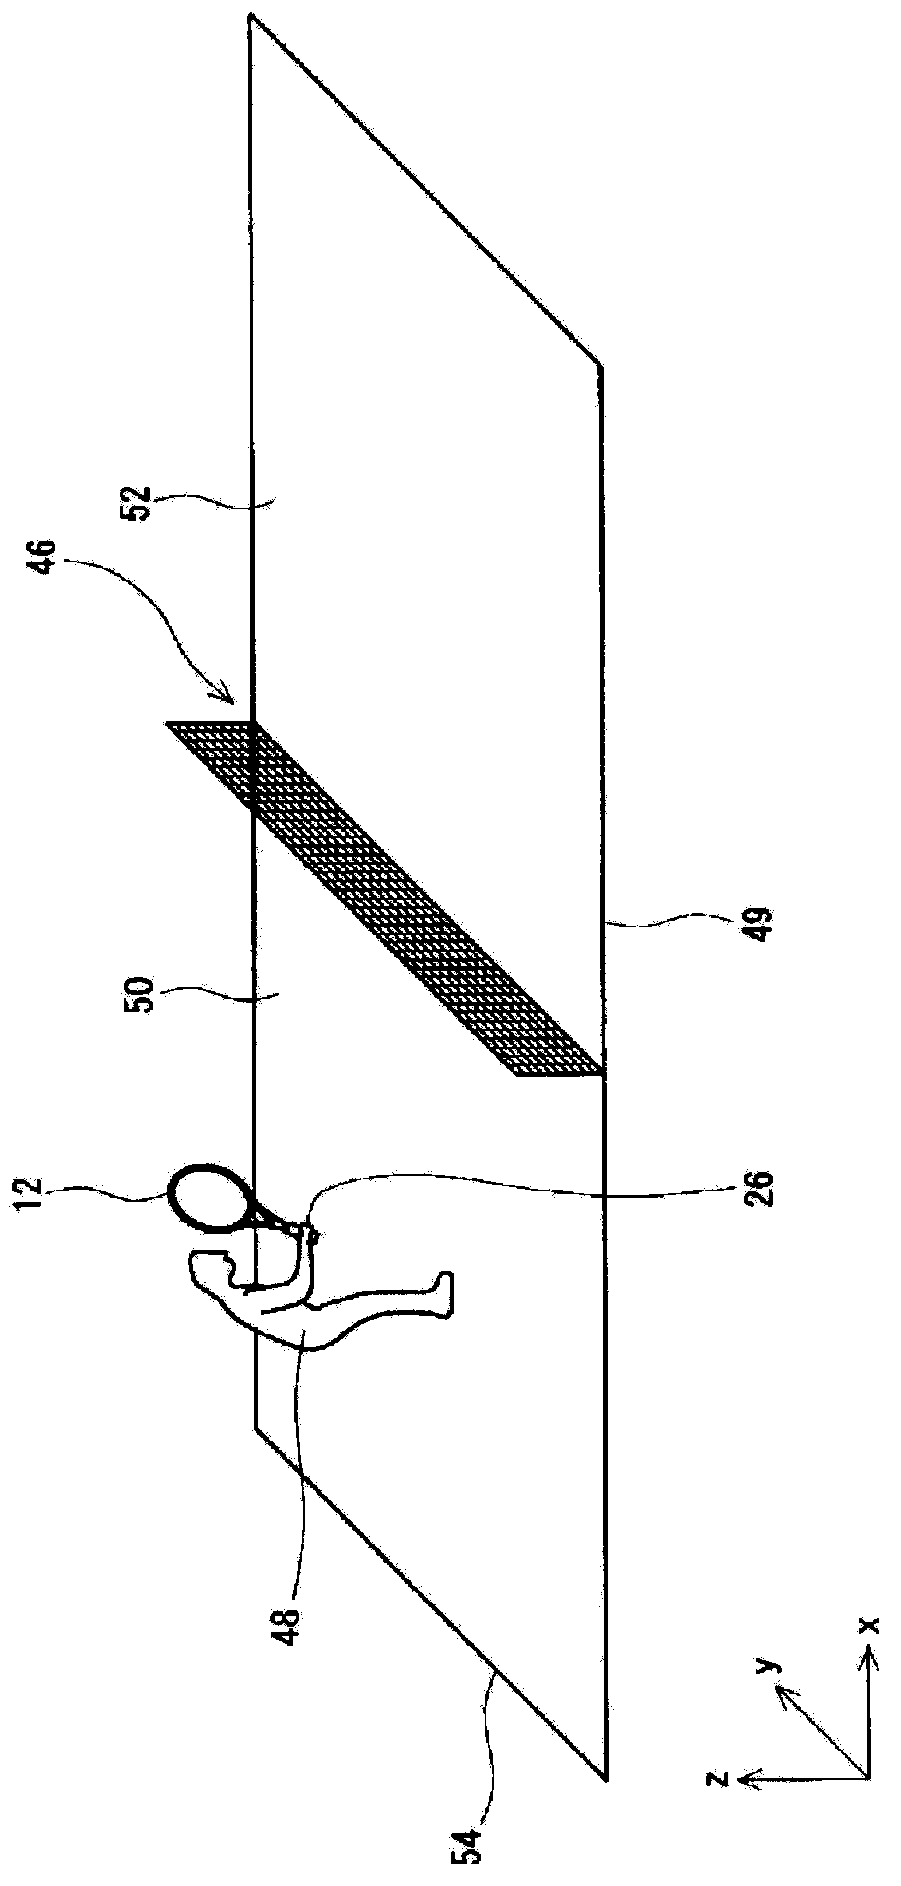 Tennis swing analyzing device and method